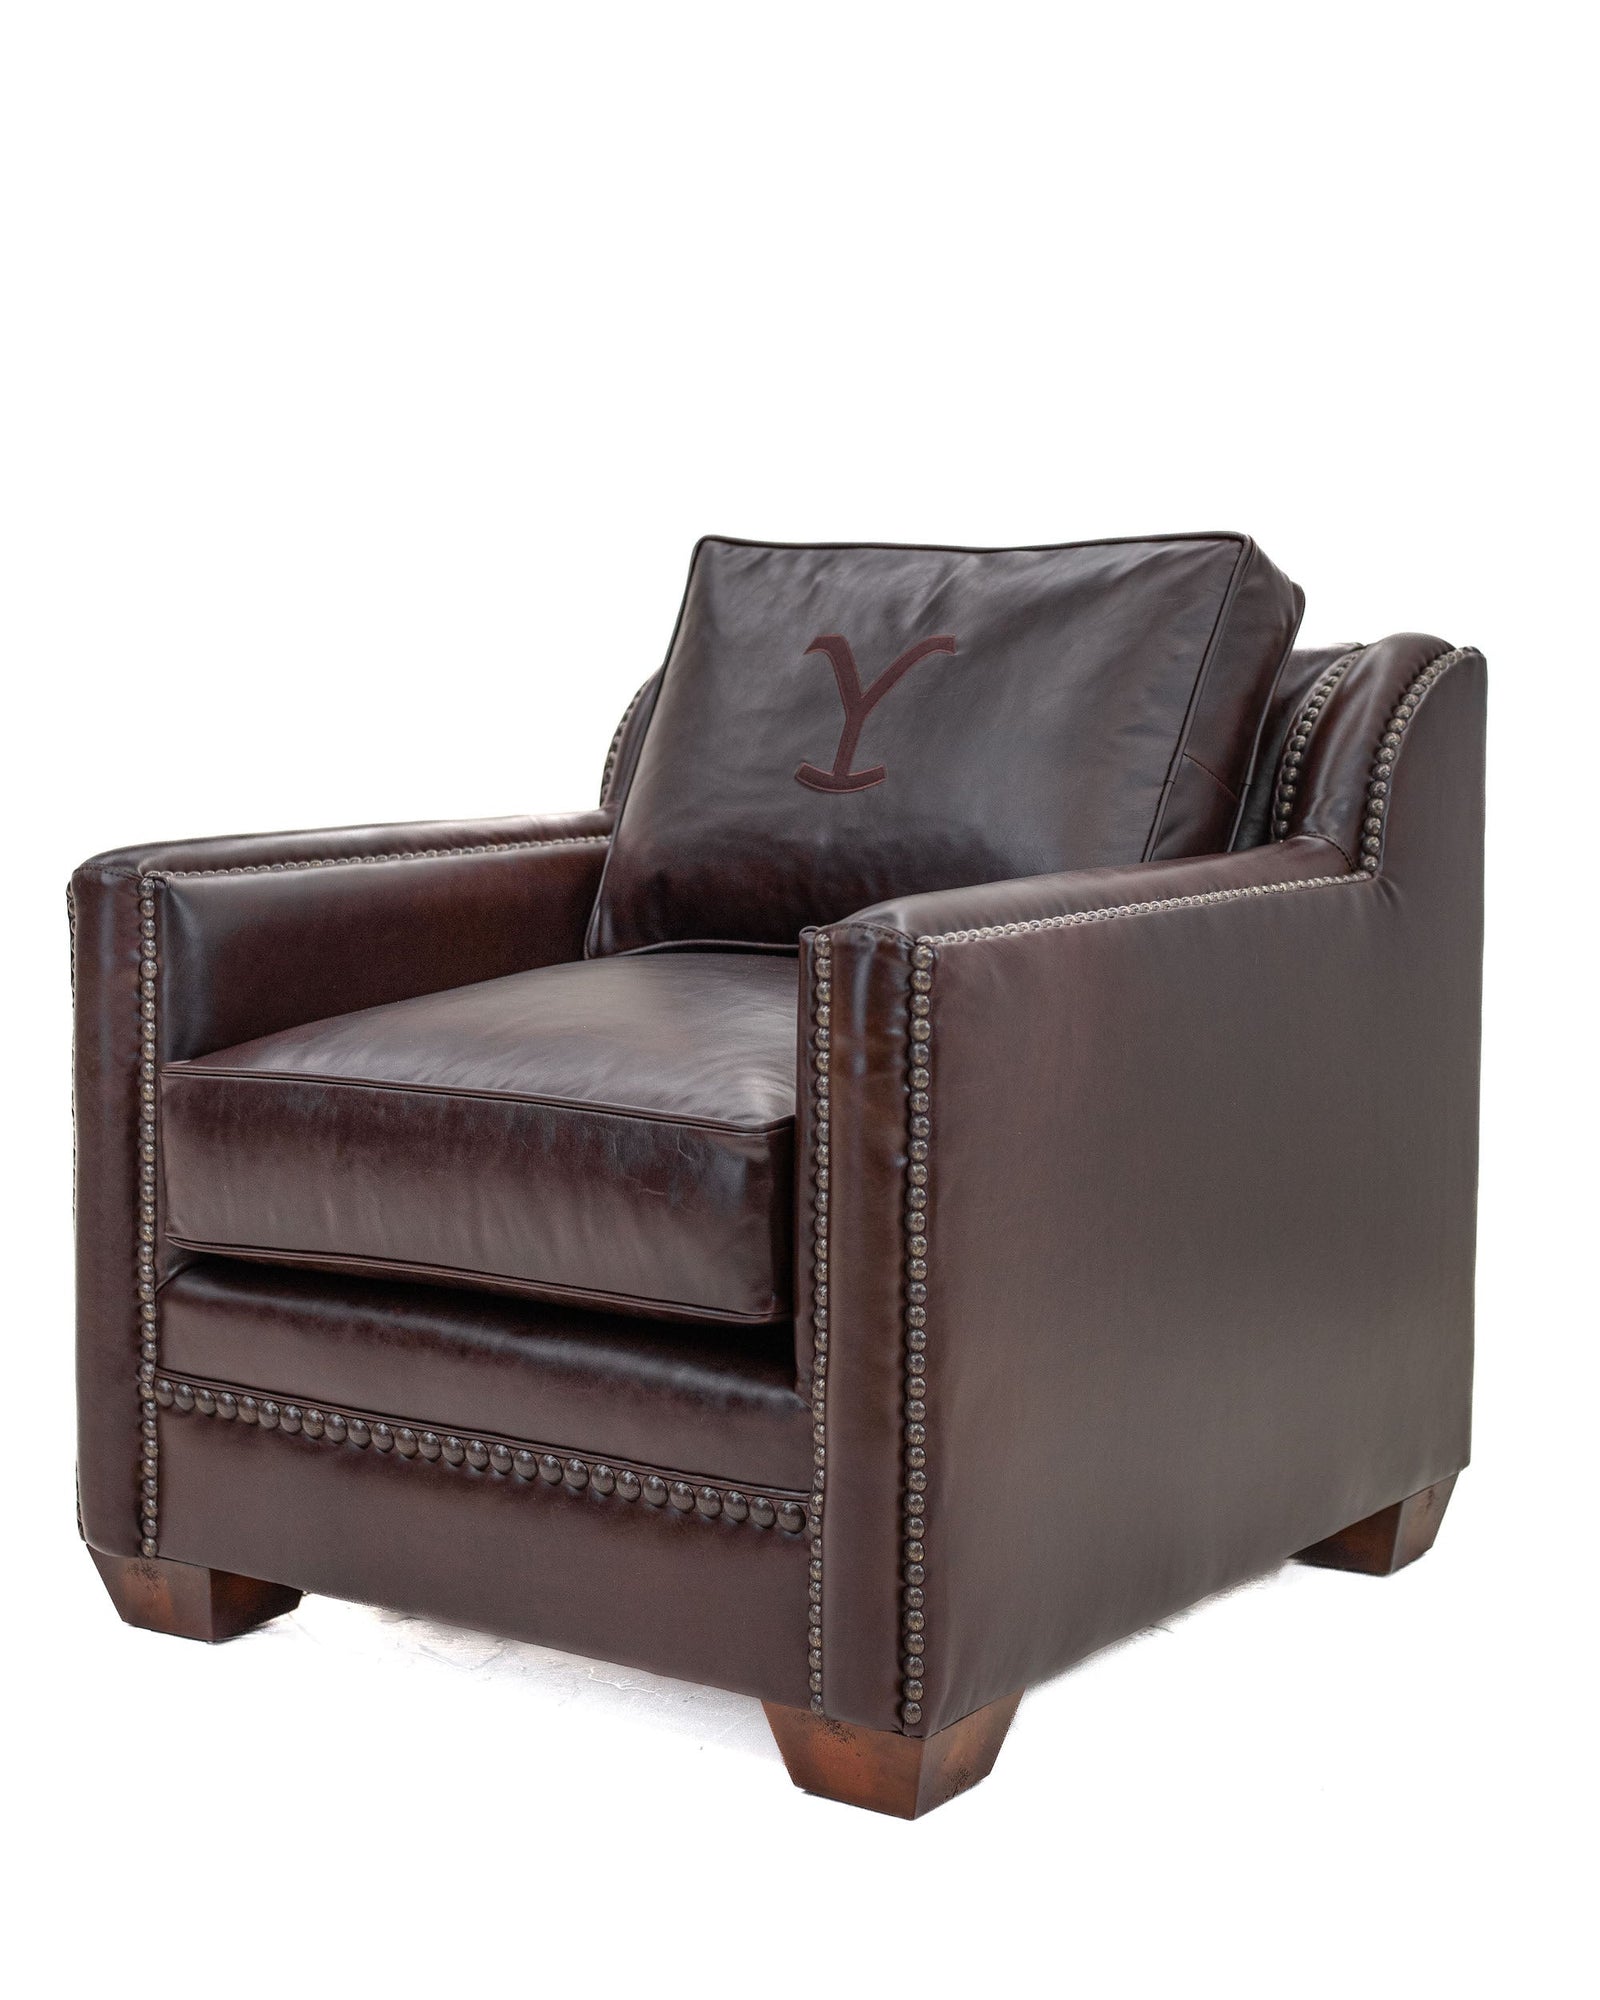 John Dutton's Brown Leather Balcony Chair